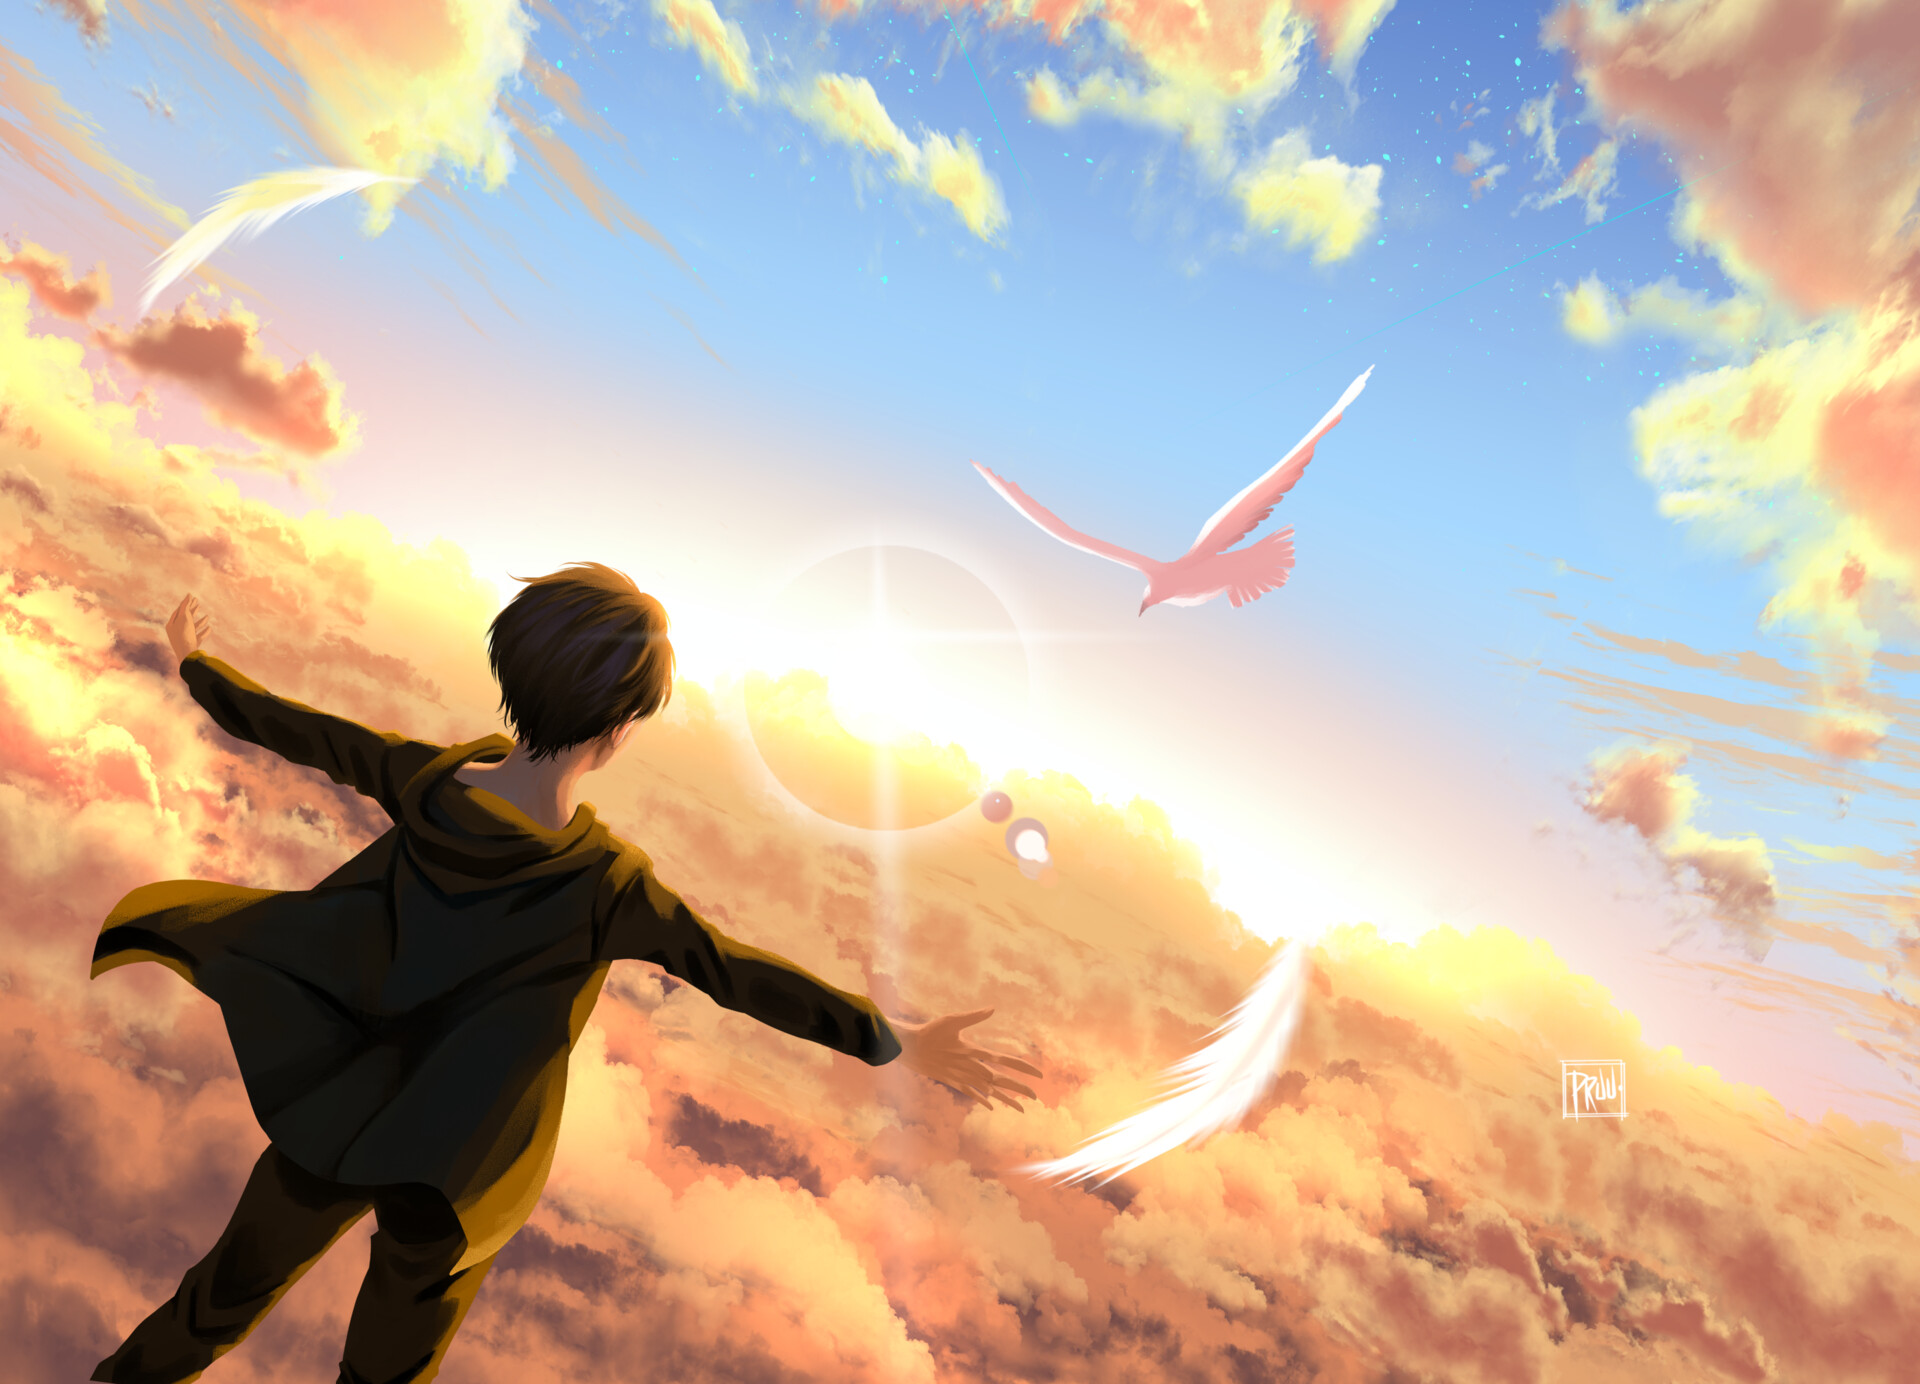 Download wallpaper 1440x900 girl smile freedom clouds sky anime  widescreen 1610 hd background